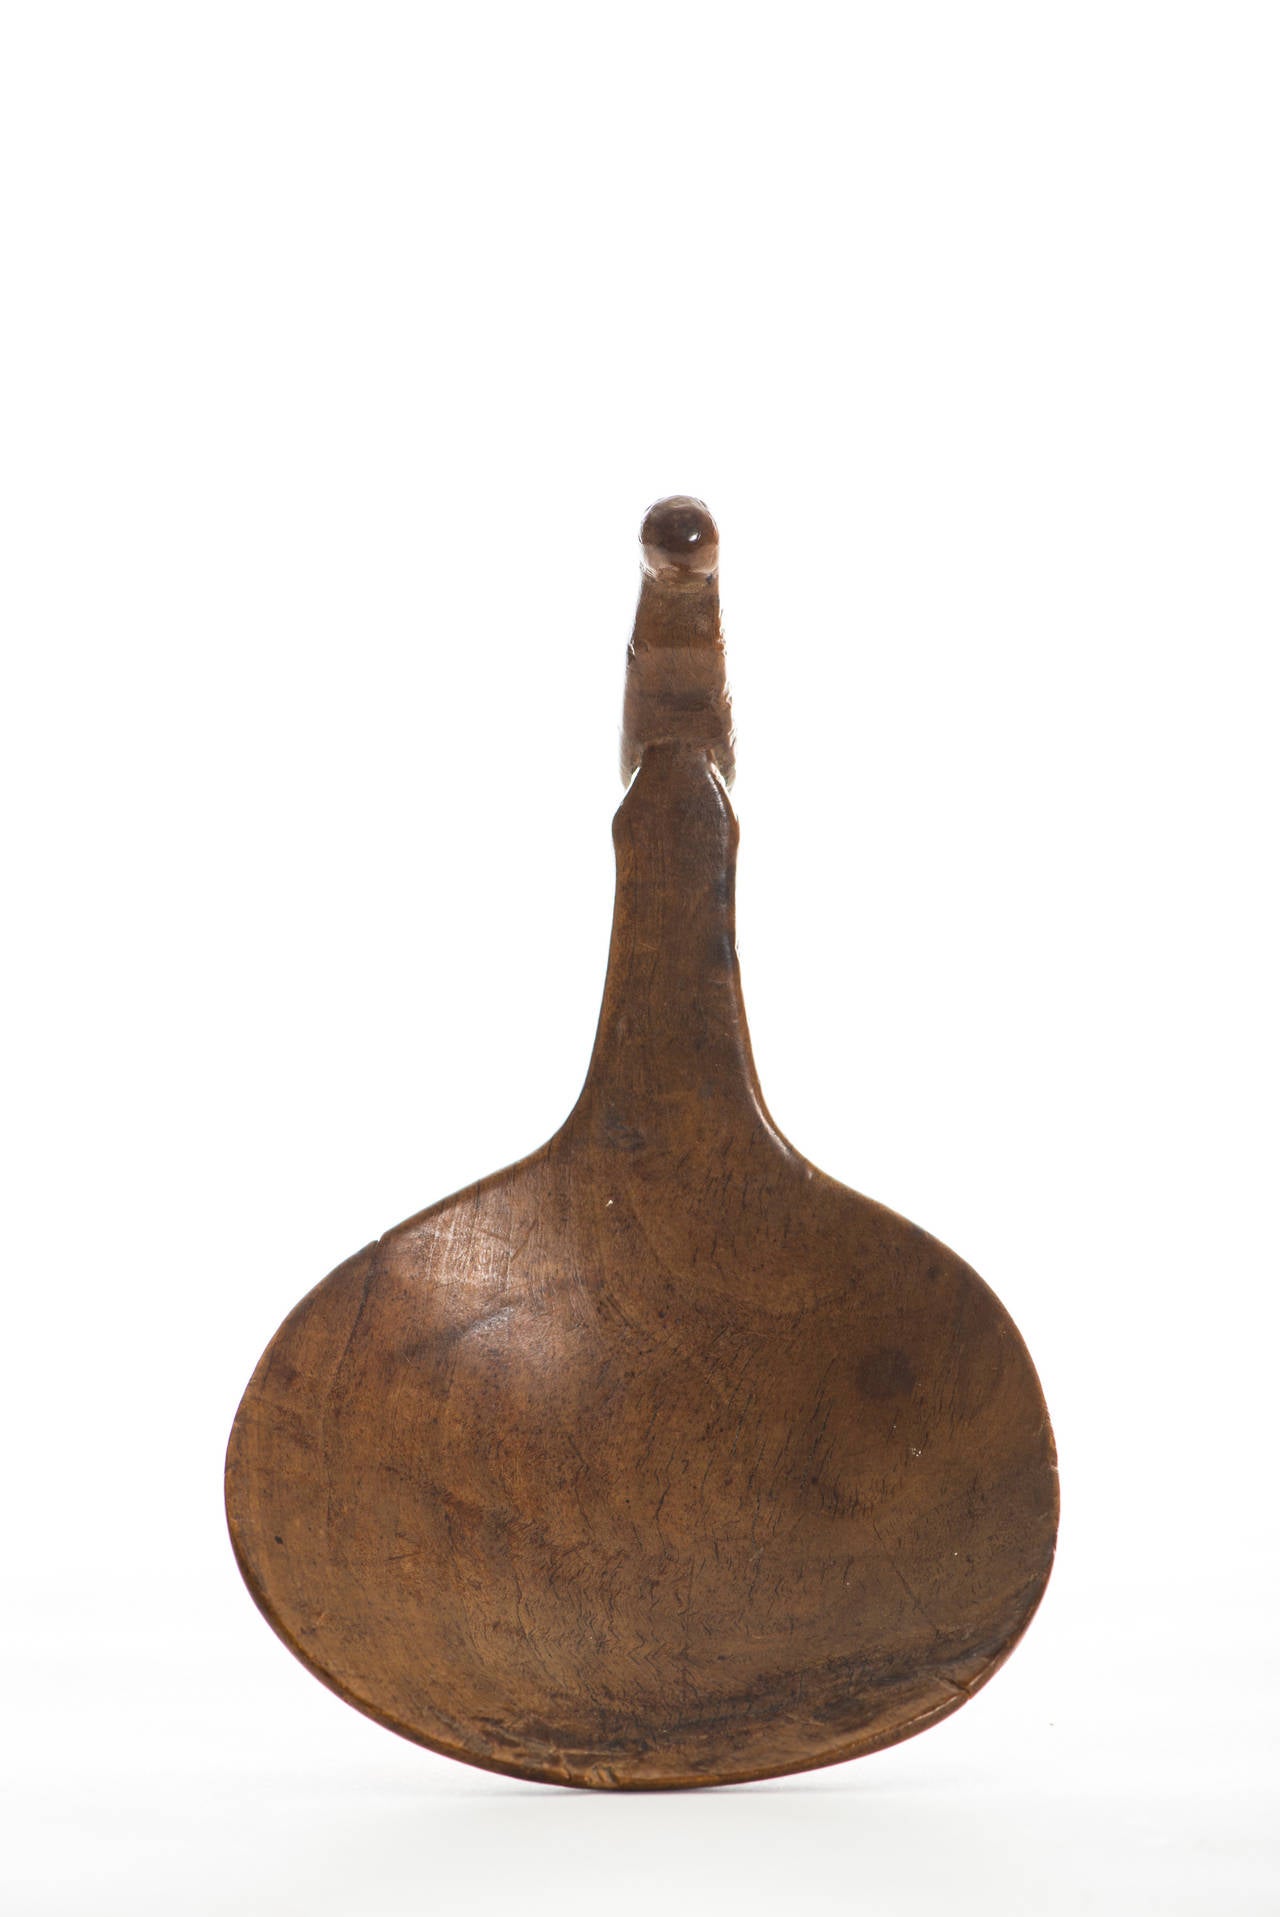 Bird Effigy Ladle.

Region/Tribe: Northeastern Woodlands/Iroquois,

circa mid-19th century.

Material: Maple.

Dimension: L. 7 3/4” x W. 5”.

Condition: Excellent, deep rich patina, no restoration.

Comments: This is a beautifully carved